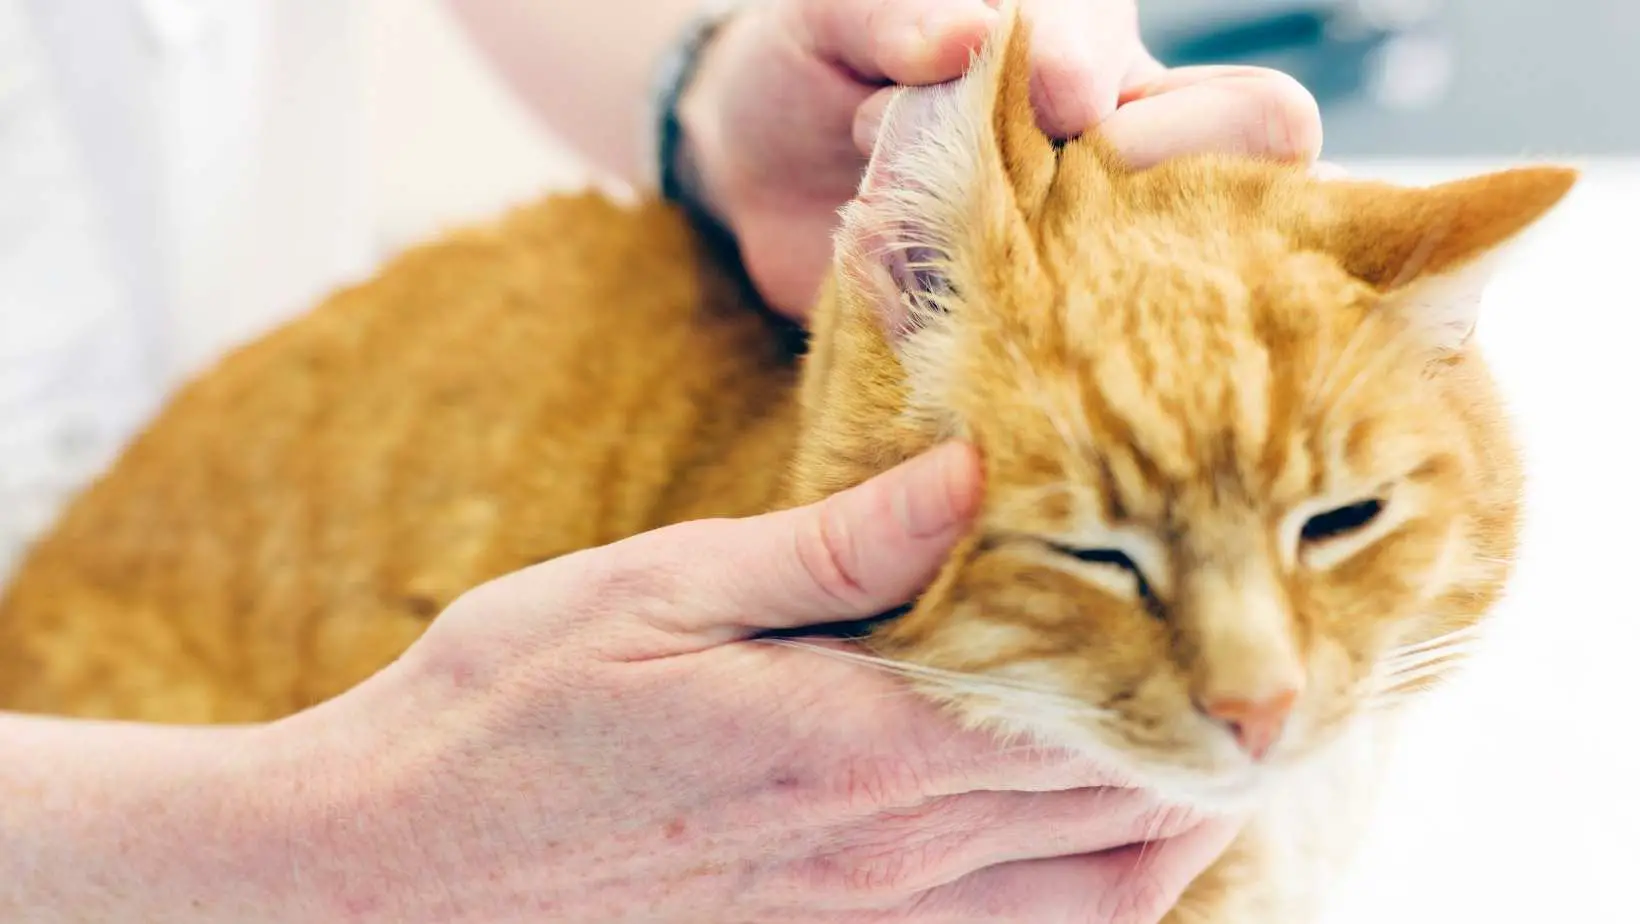 How Do Cats Get Ear Infections?